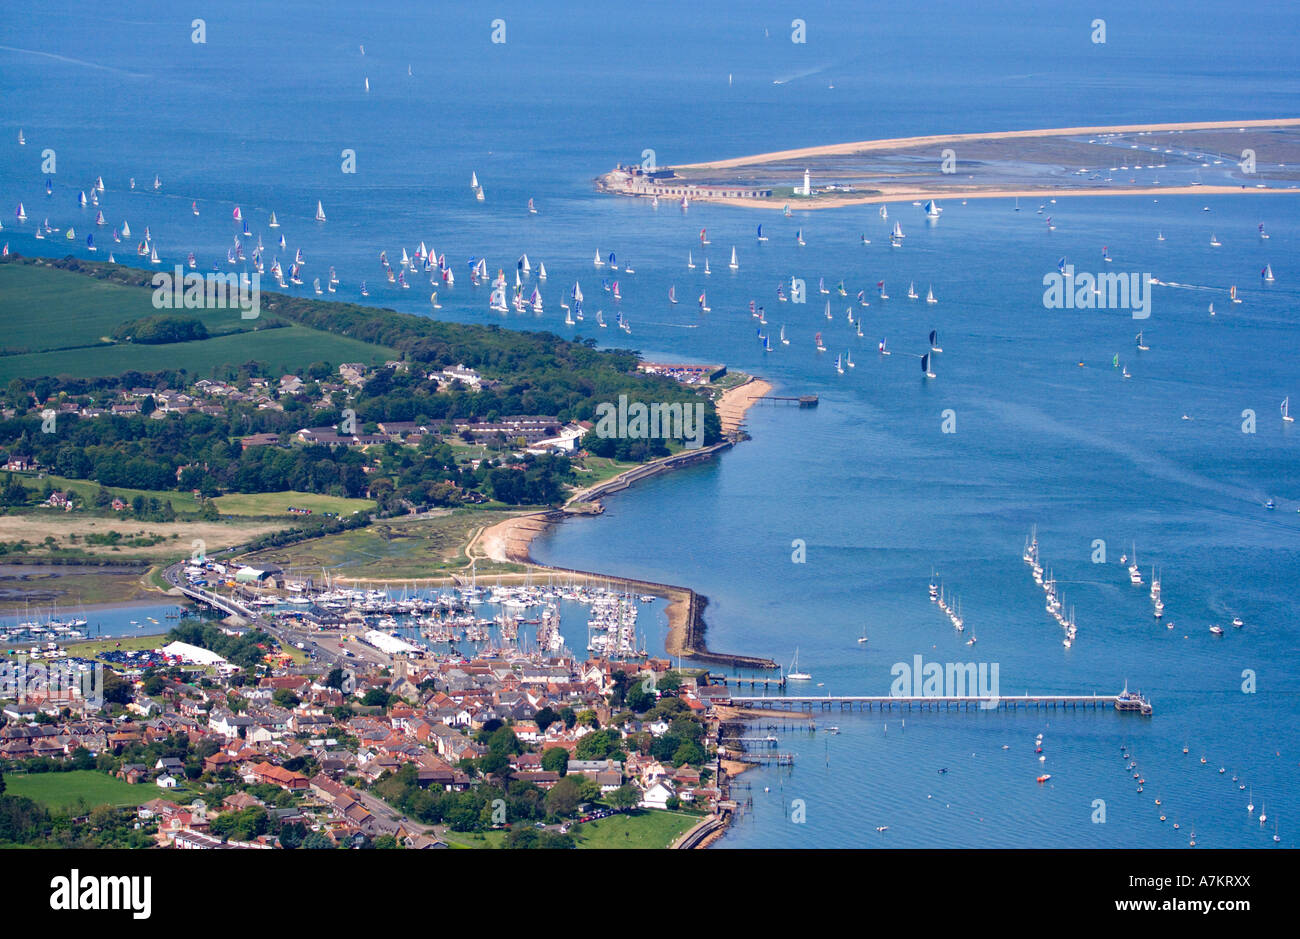 Aerial view of the Solent between Yarmouth Harbour and Hurst point. Yachts competing in the Round  the Island race 2006. UK. Stock Photo